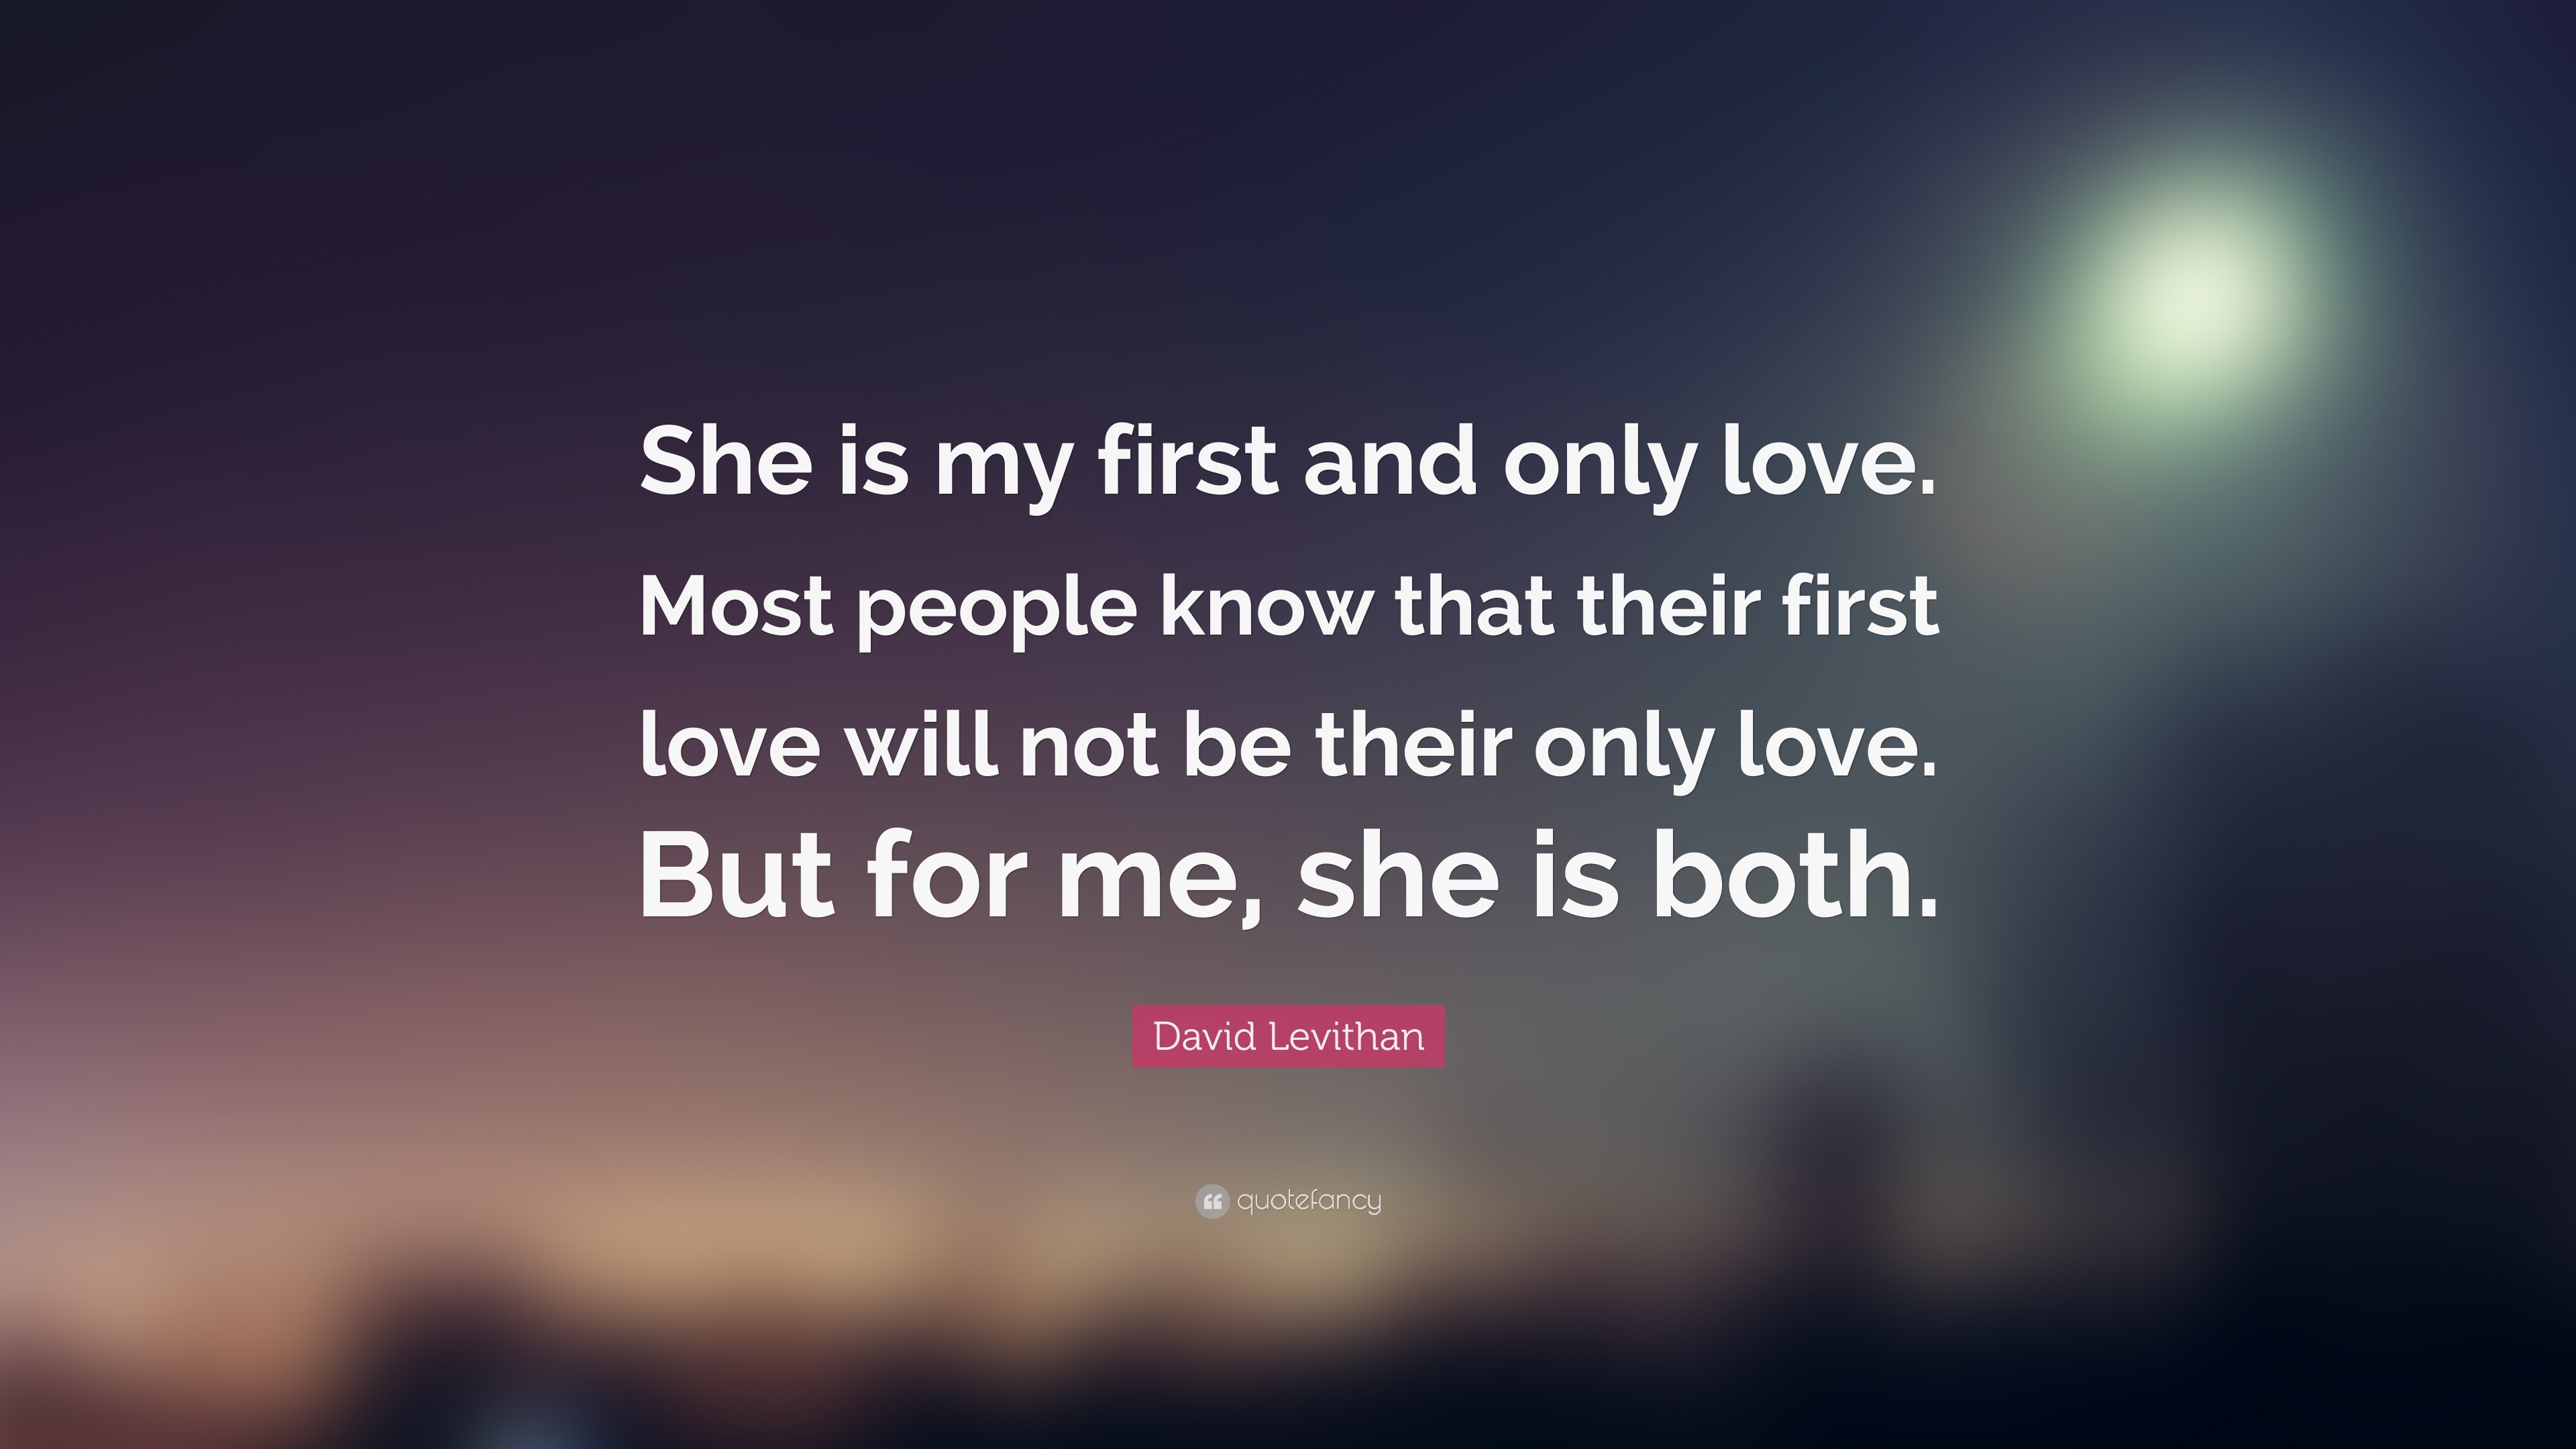 David Levithan Quote “She is my first and only love Most people know